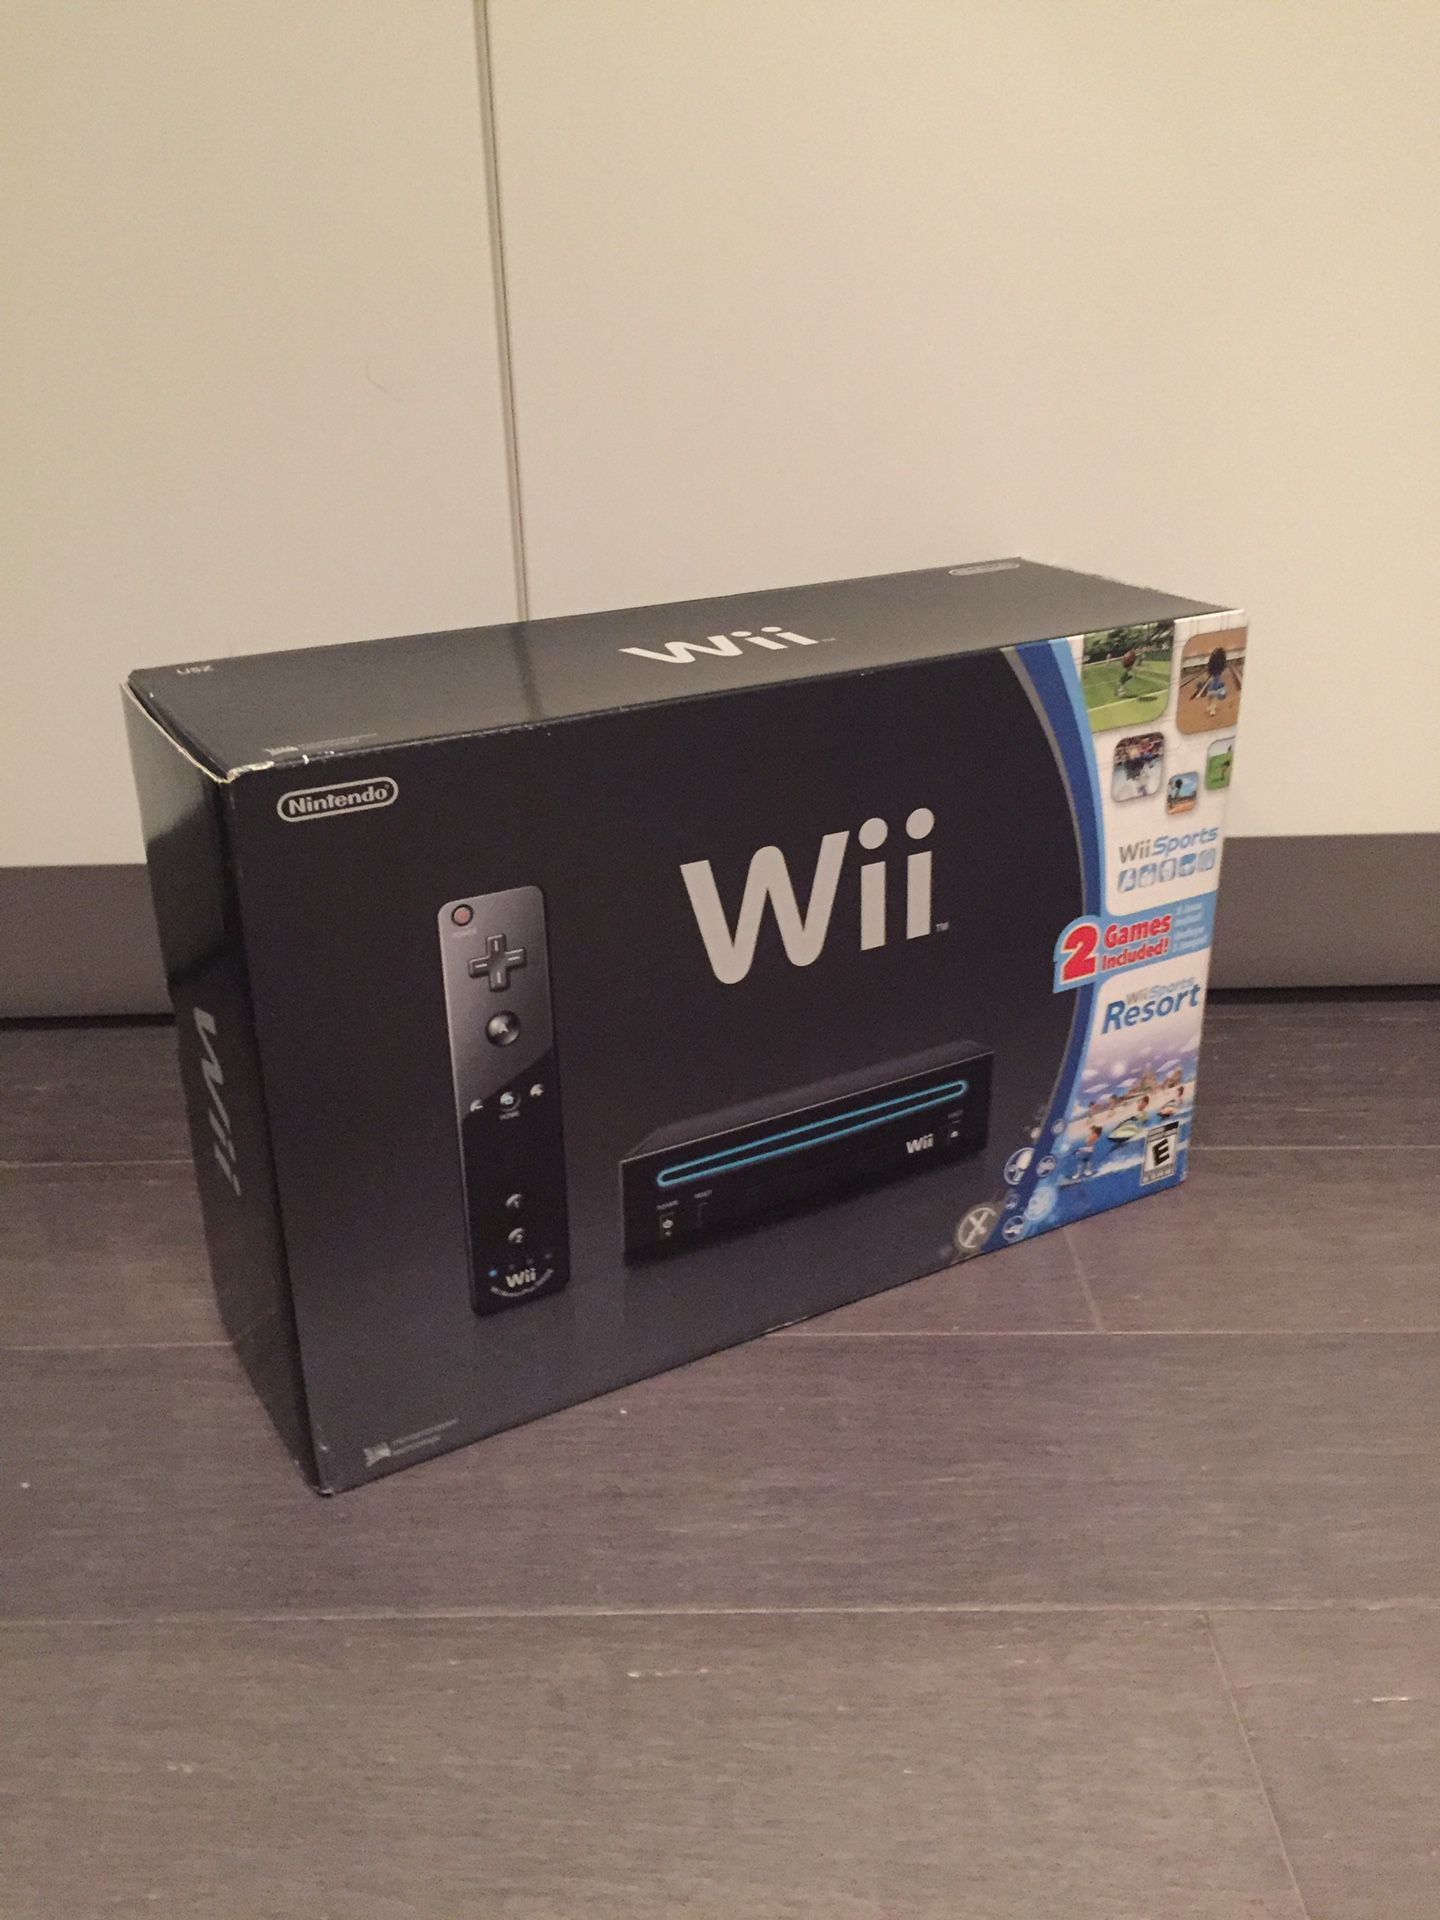 Wii bundle with wii sports and other games